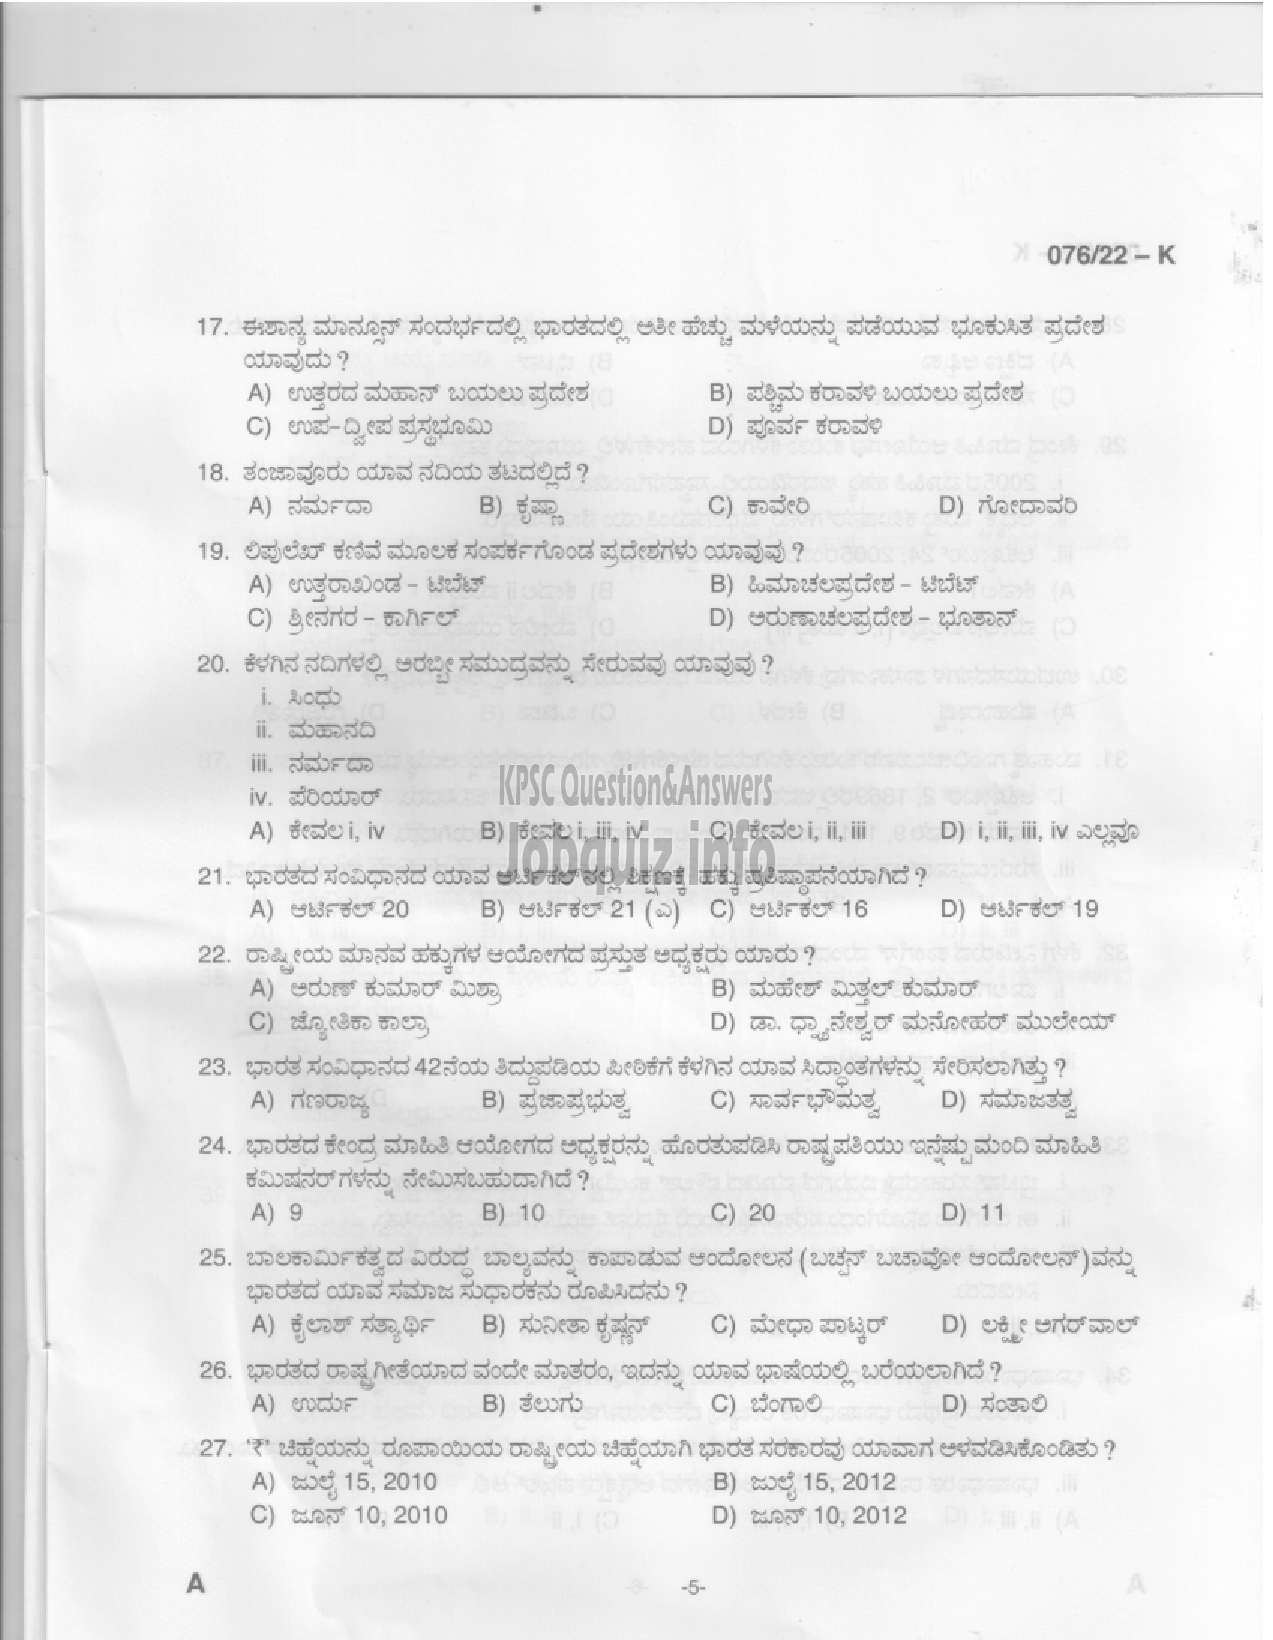 Kerala PSC Question Paper - Common Preliminary Examination 2022 (Up to SSLC Level) Stage V - Various -3